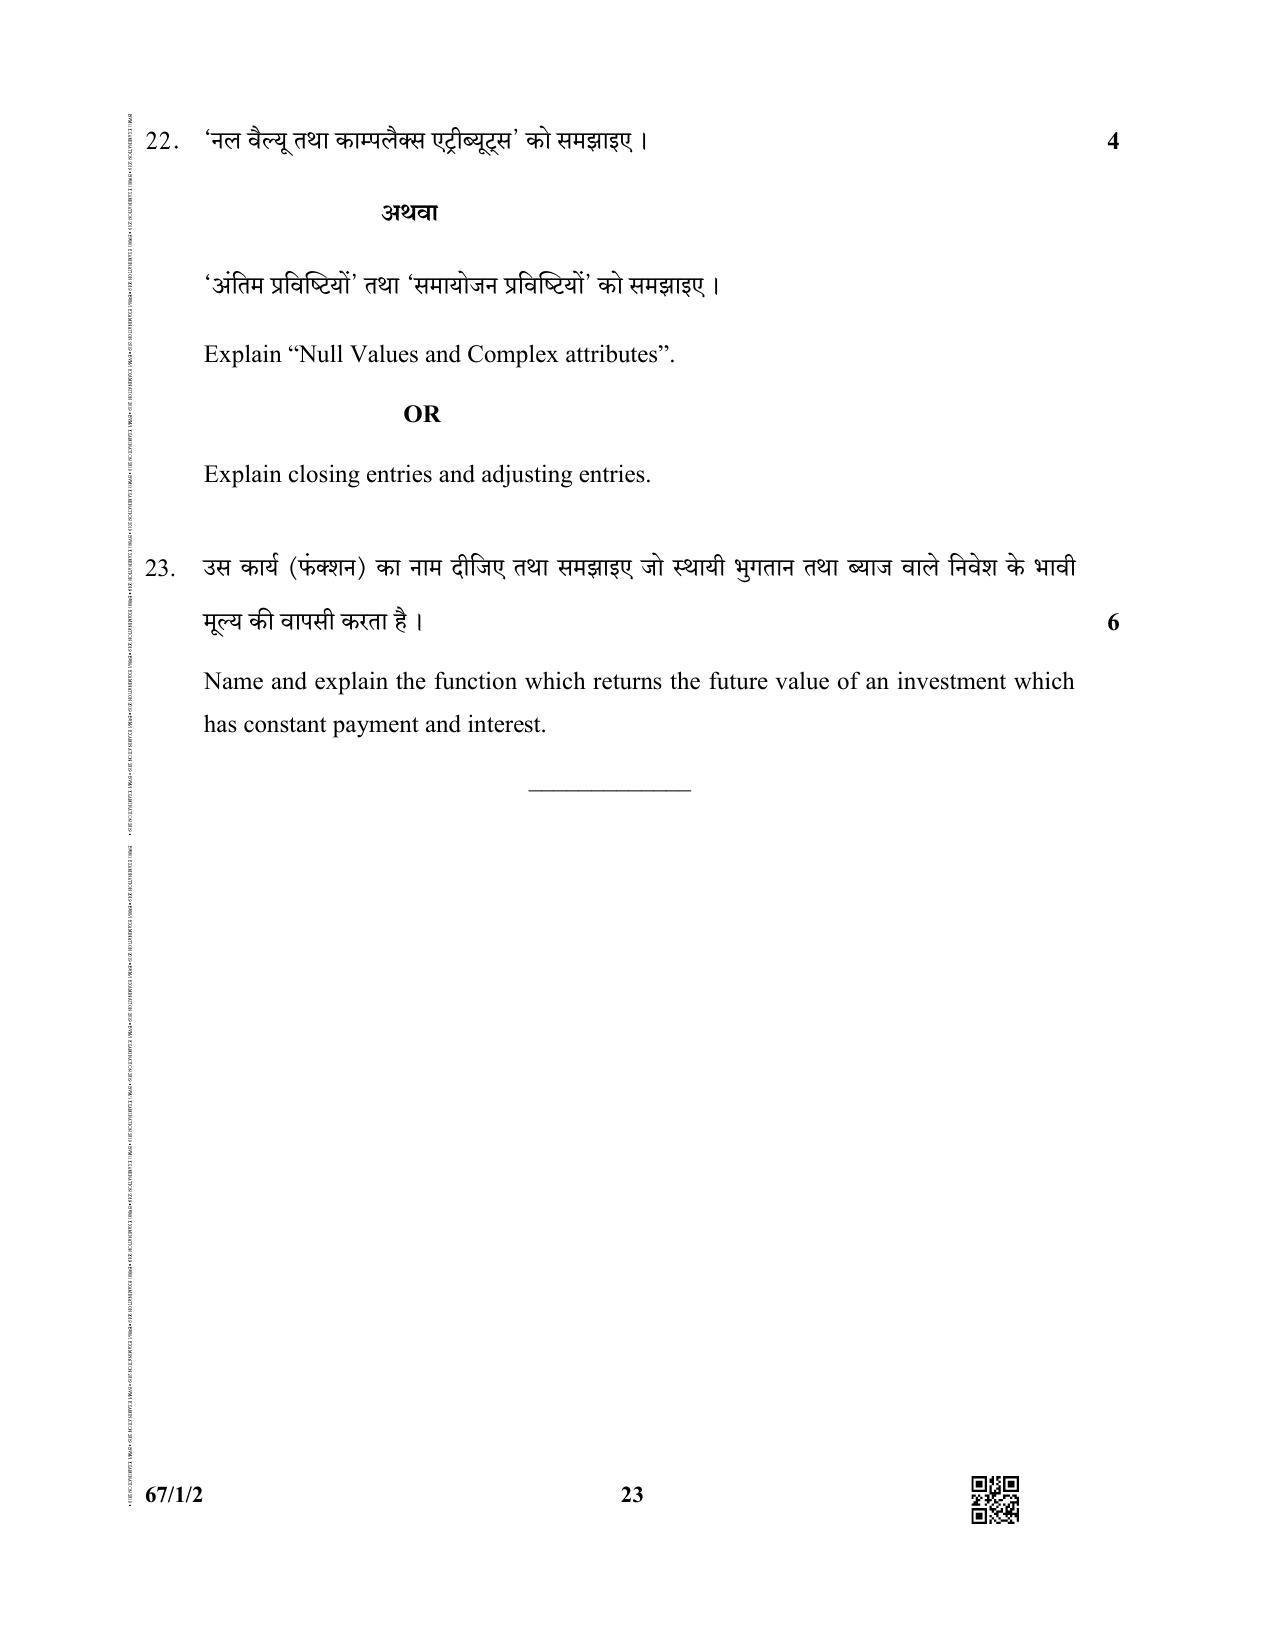 CBSE Class 12 67-1-2  (Accountancy) 2019 Question Paper - Page 23